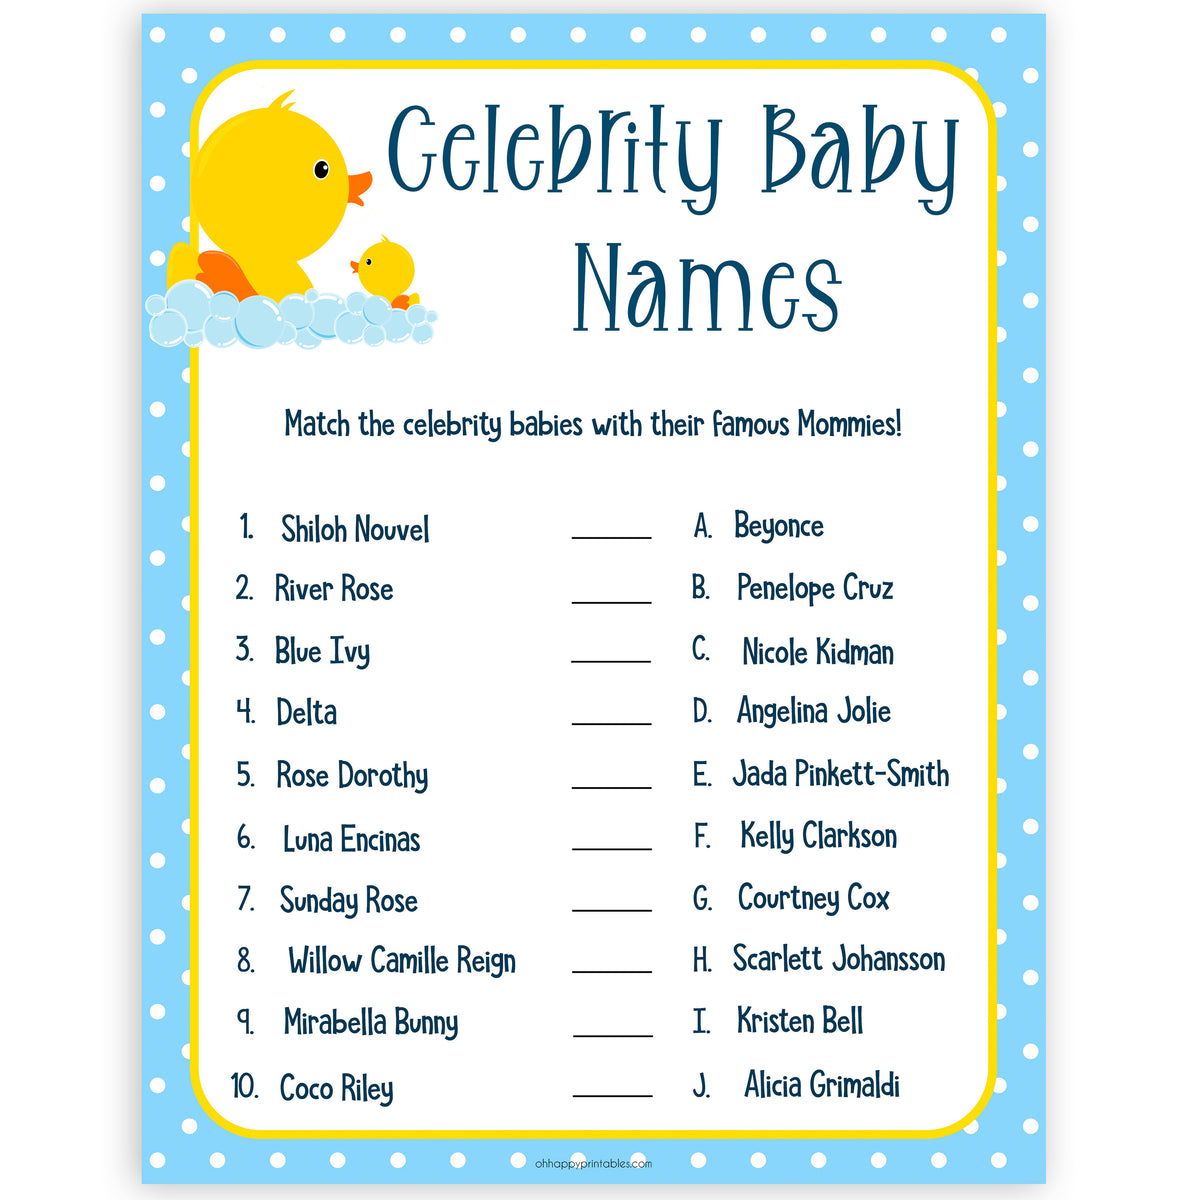 rubber ducky baby games, celebrity baby names baby game, printable baby games, baby shower games, rubber ducky baby theme, fun baby games, popular baby games